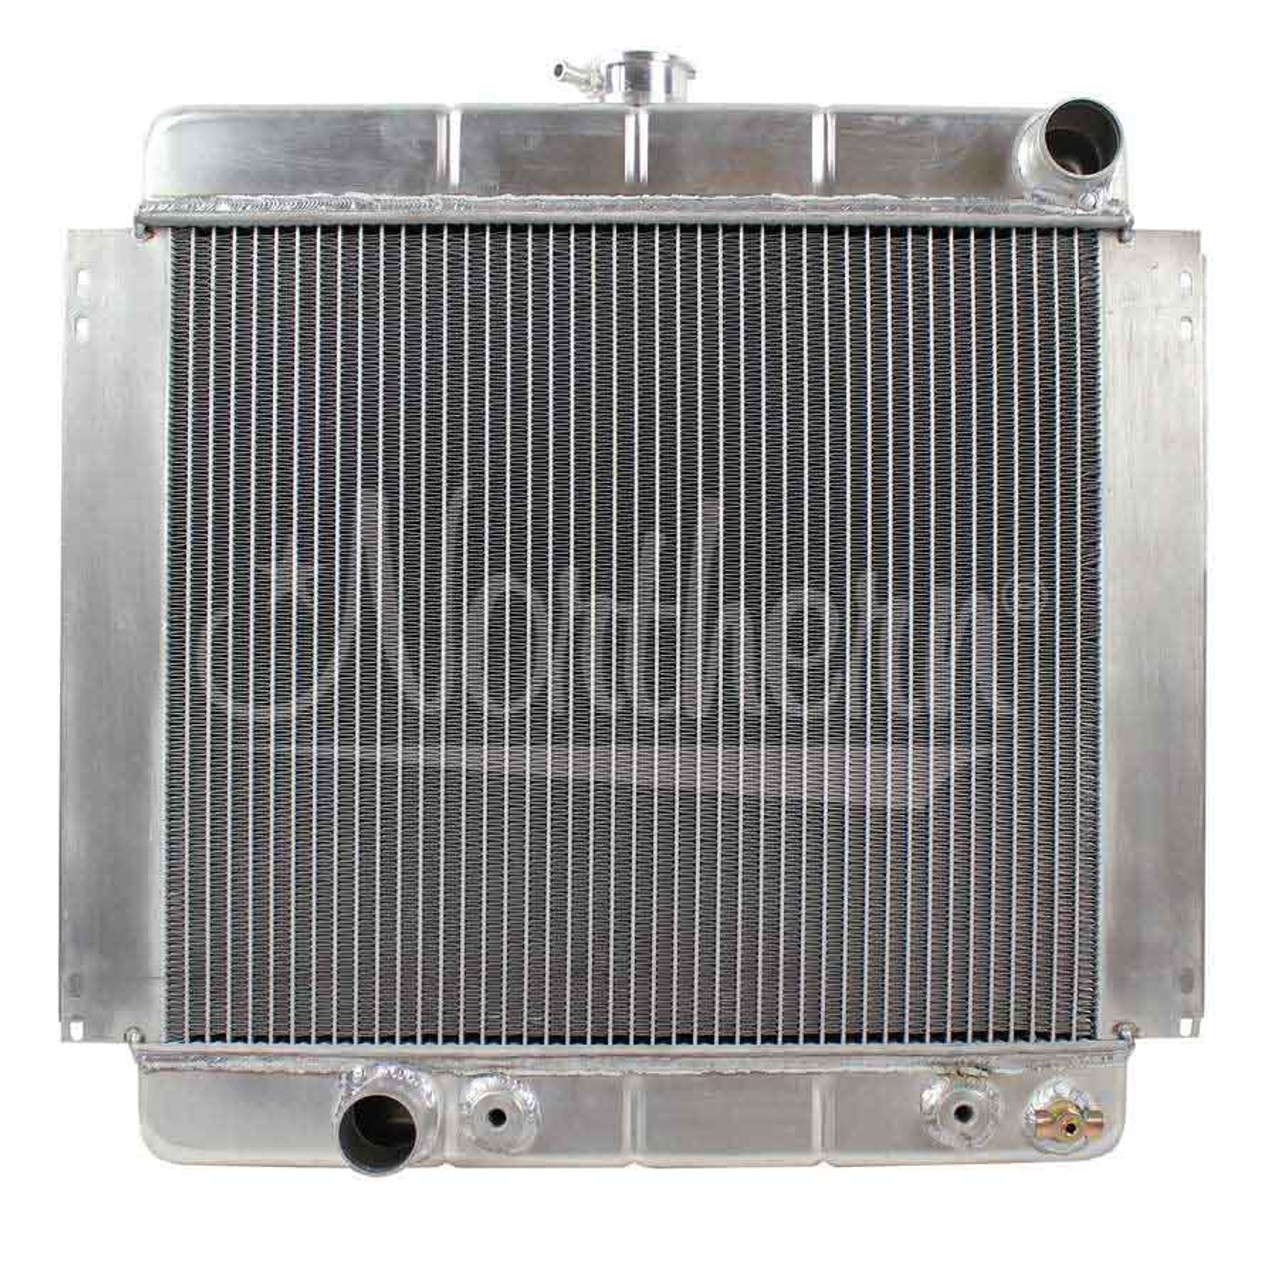 Northern Aluminum Radiator Ford 67-70 Mustang - NRA205213